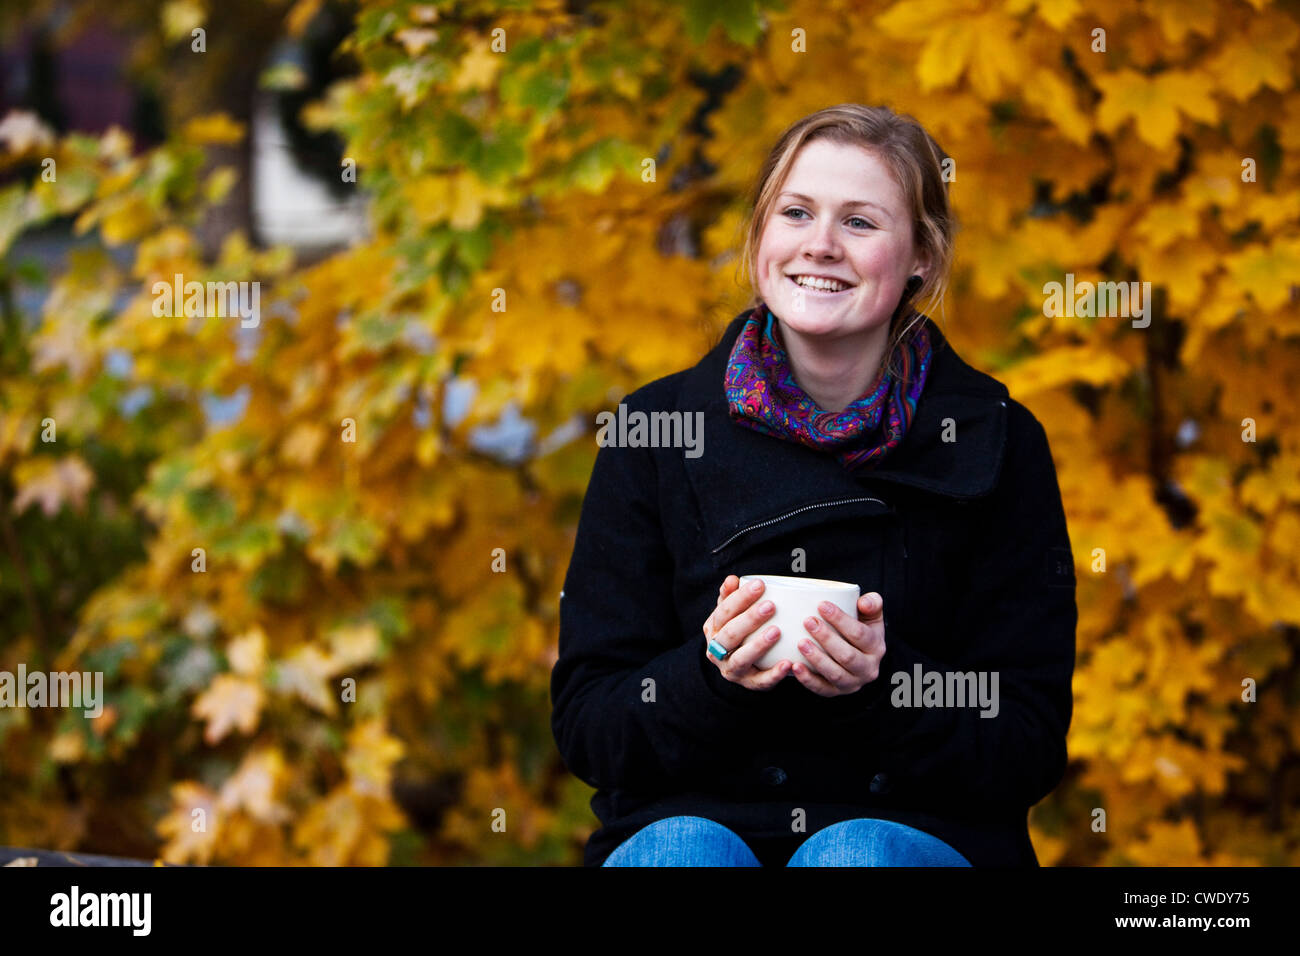 A young woman smiling holds a cup of coffee surrounded by fall colors in Idaho. Stock Photo